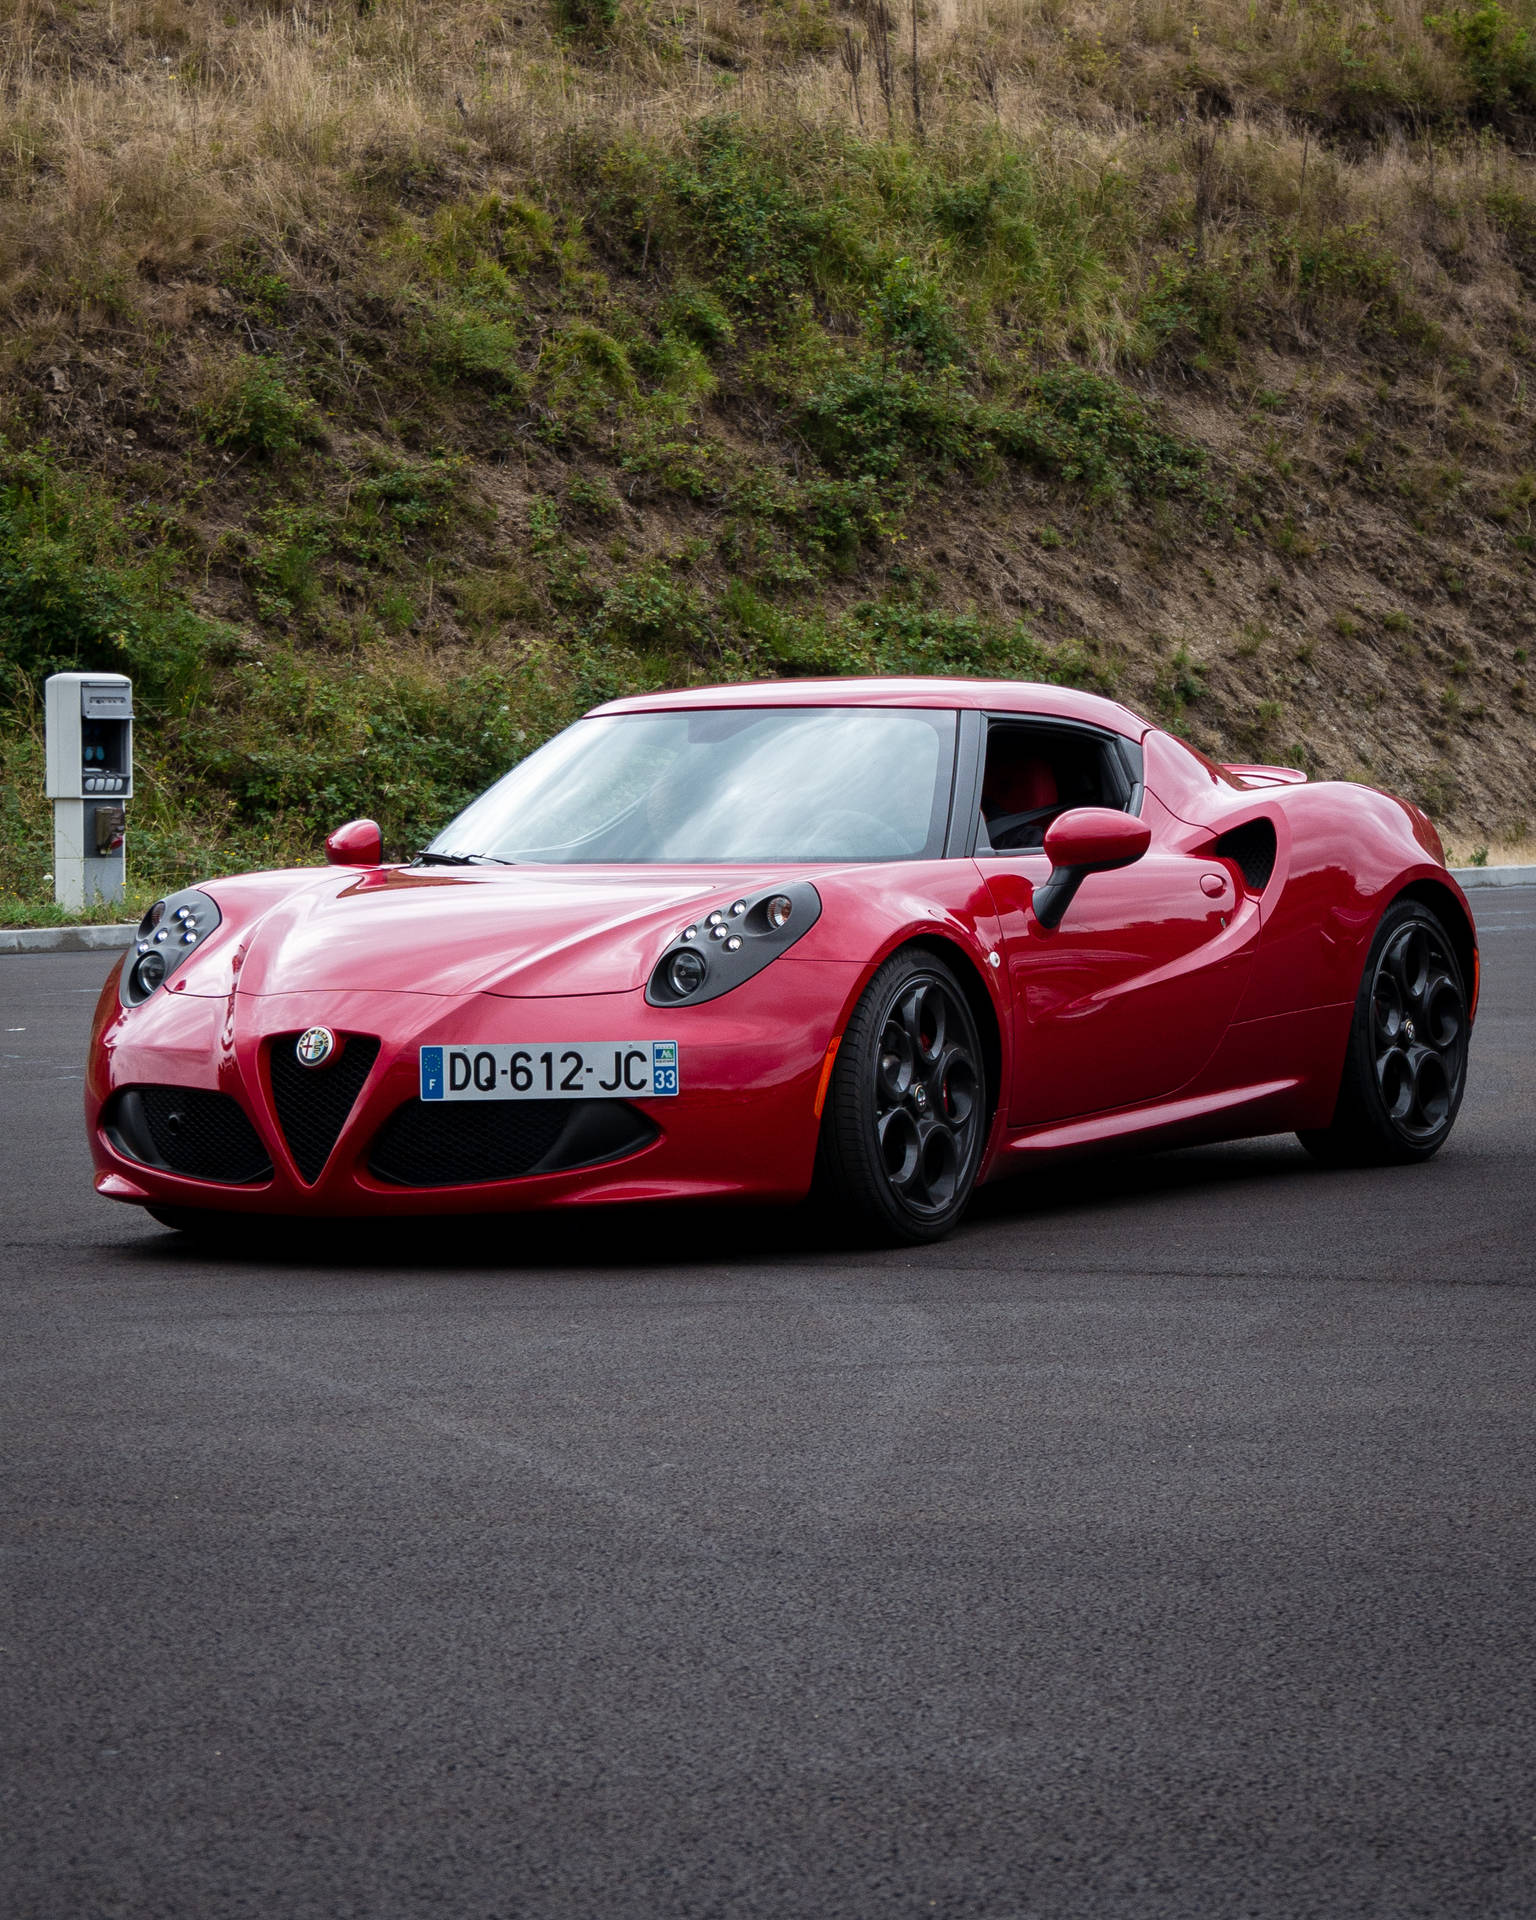 Enjoy the sleek style of the iconic red Alfa Romeo 8 C Competizione Wallpaper